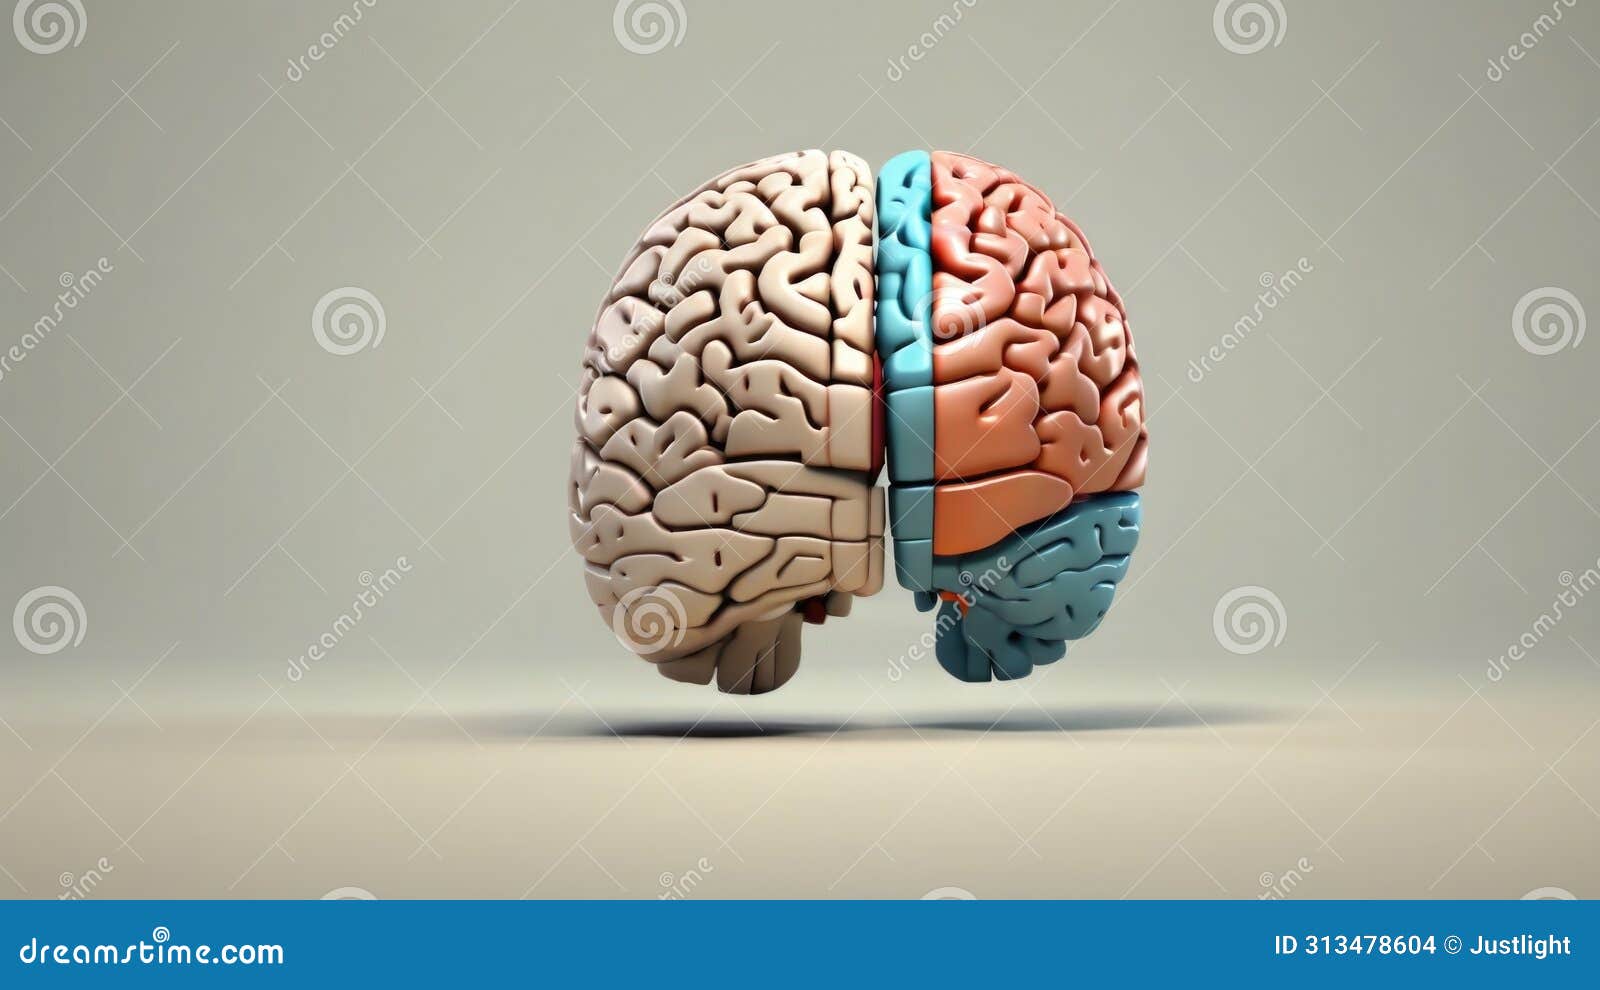 an animated brain is divided into two halves, one representing selfesteem and the other selfconcept. the selfesteem half